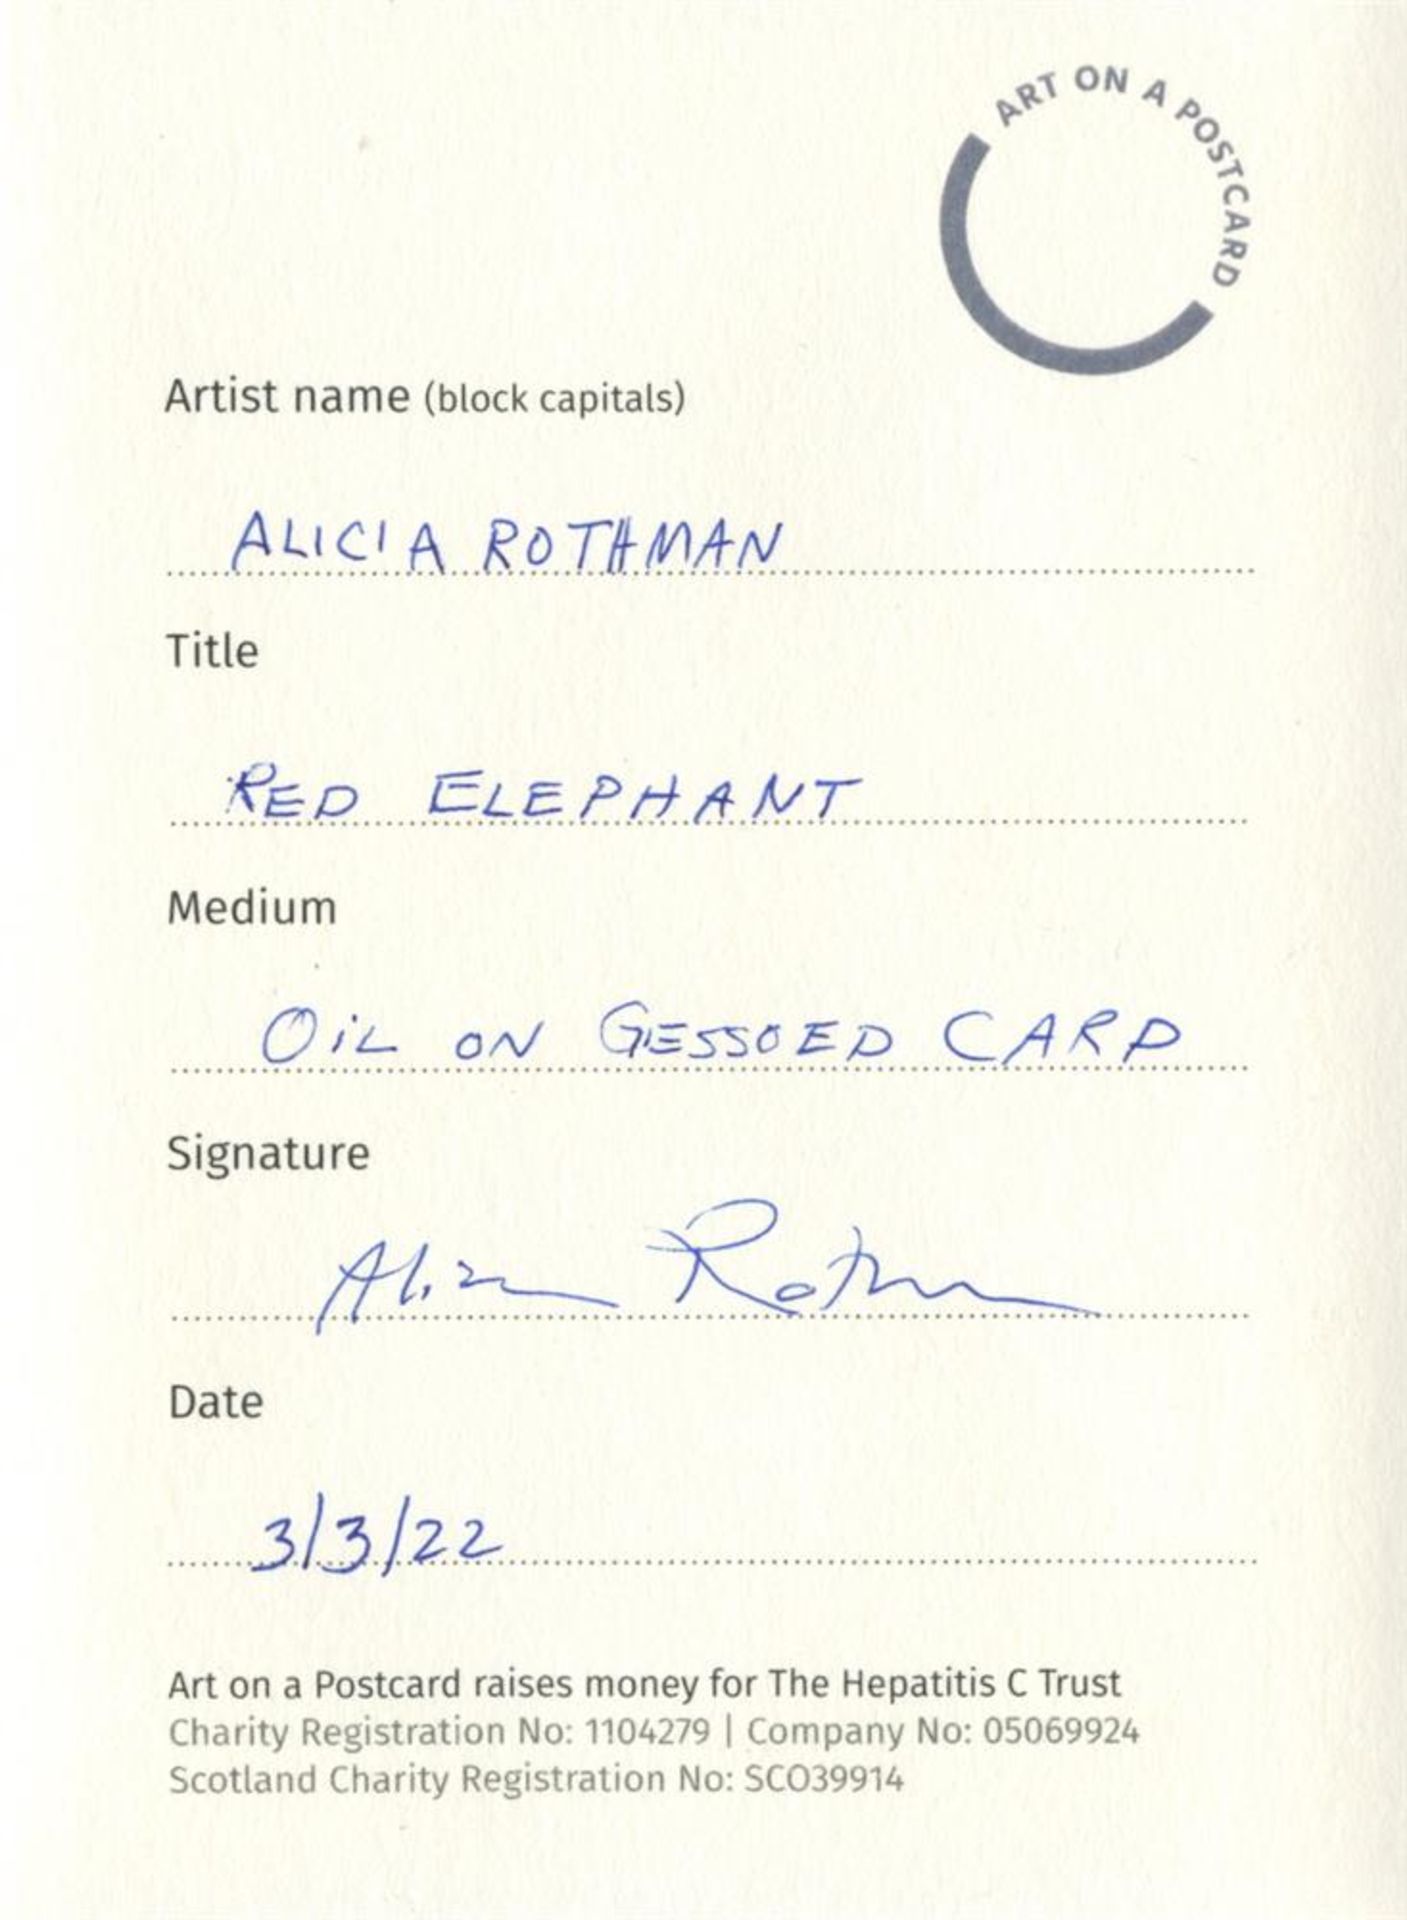 Alicia Rothman, Red Elephant, 2022 - Image 2 of 3